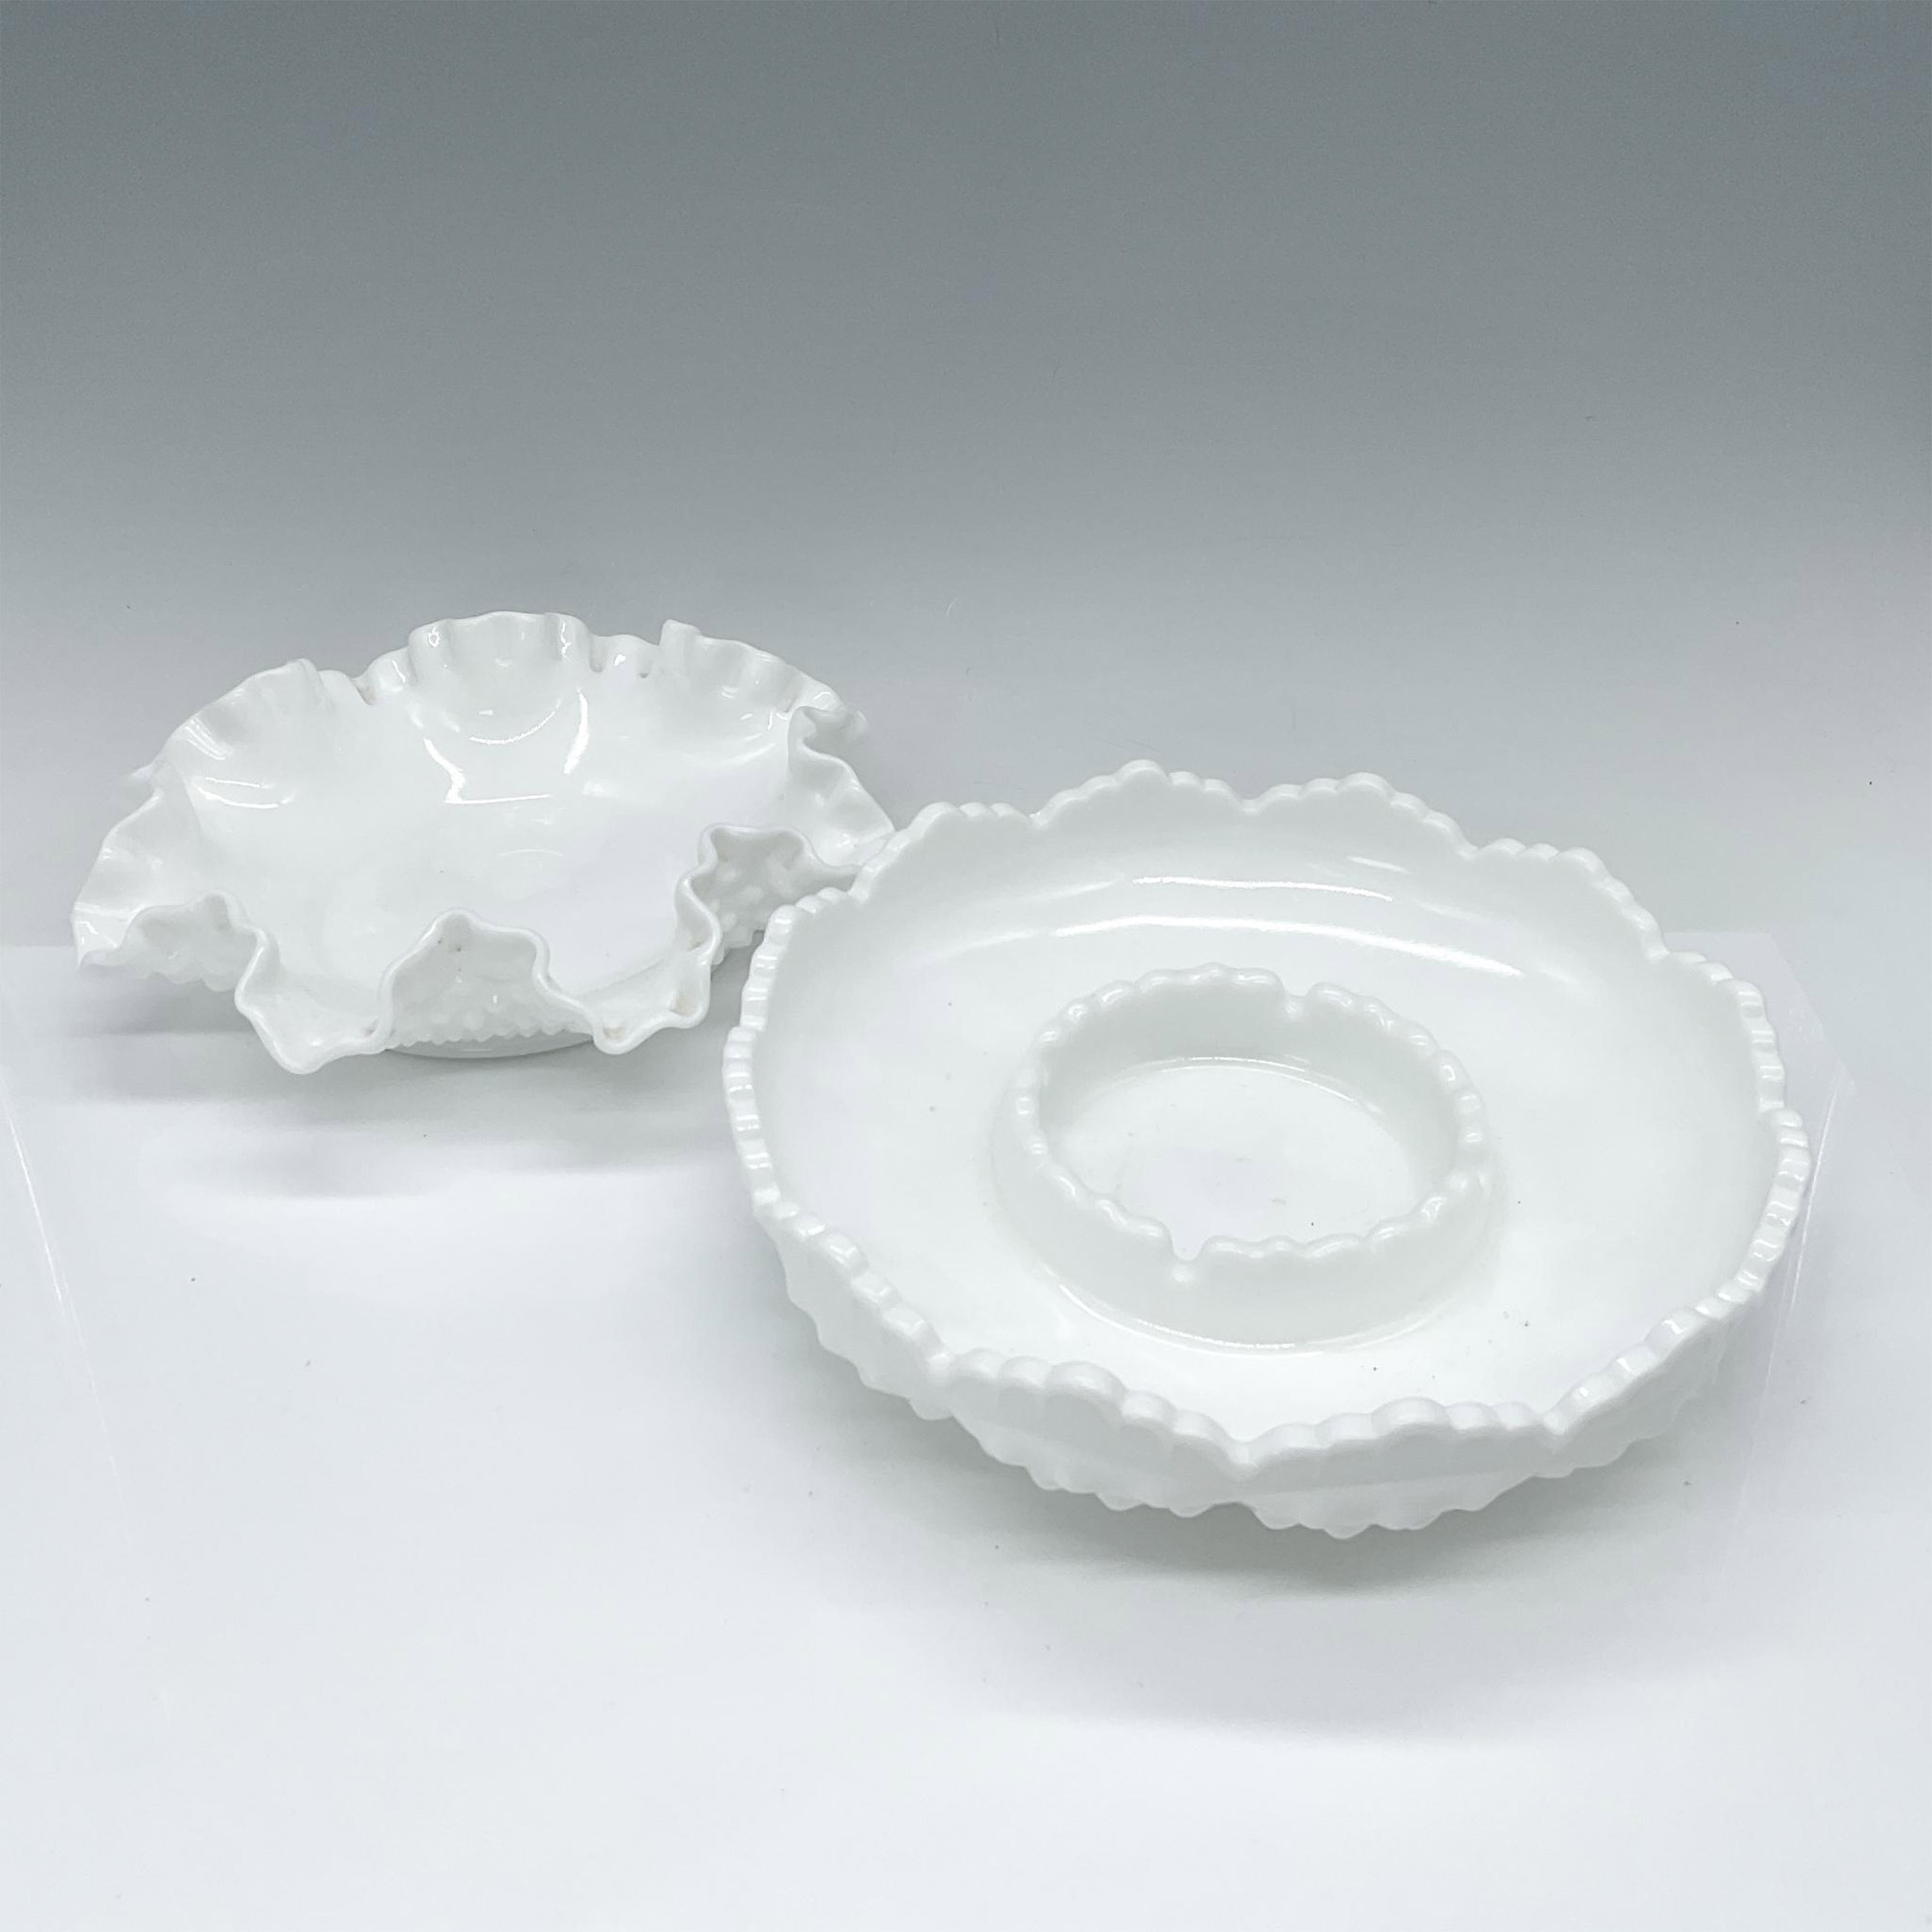 2pc Fenton Hobnail Milk Glass Dishes - Image 2 of 4